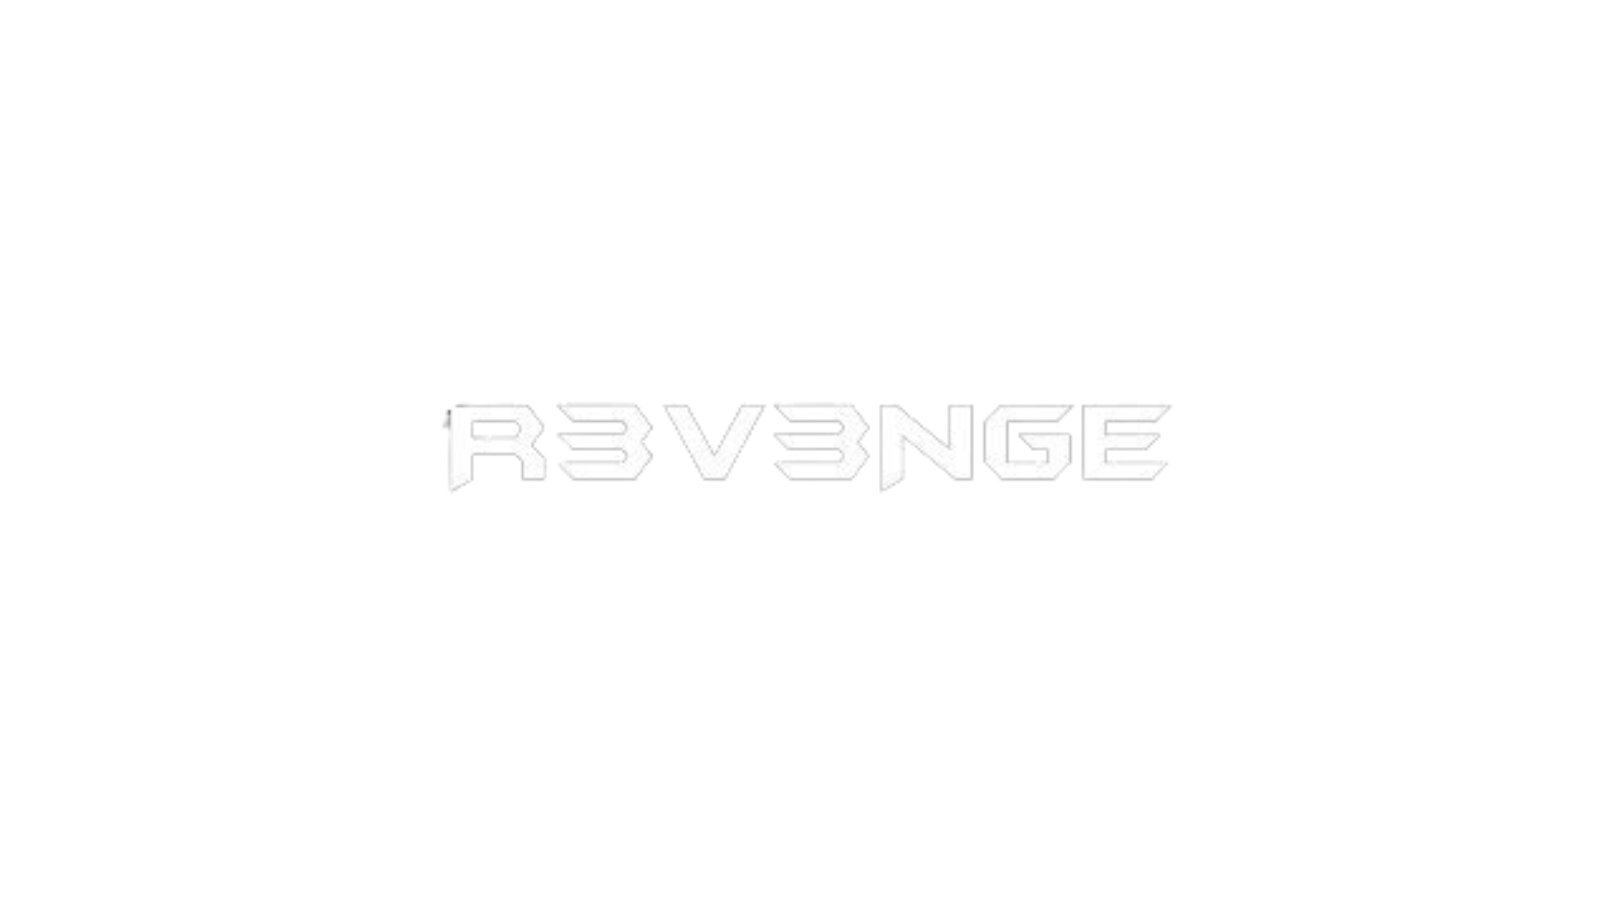 Zombie FPS R3V3NGE Is Now Live in Beta on the Elixir Game Launcher